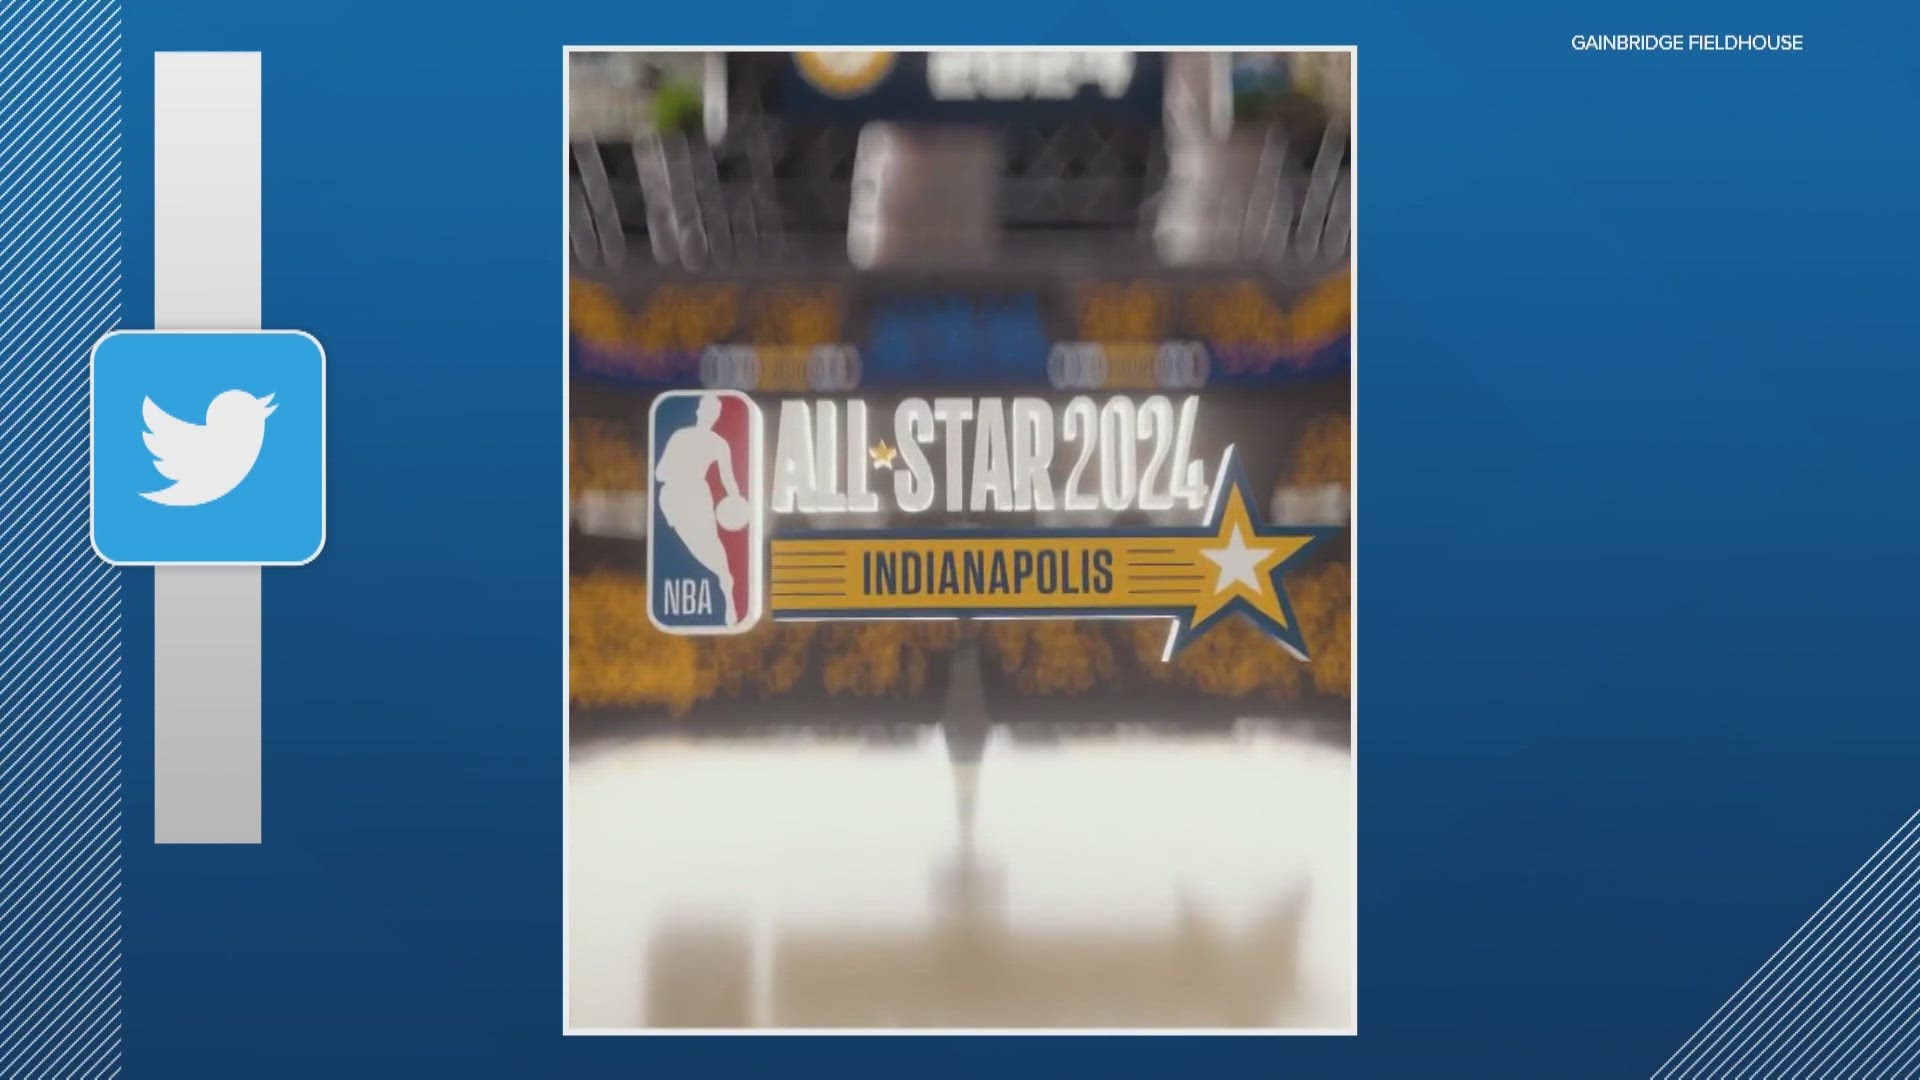 NBA All-Star 2024's economic impact on Indy could surpass $250